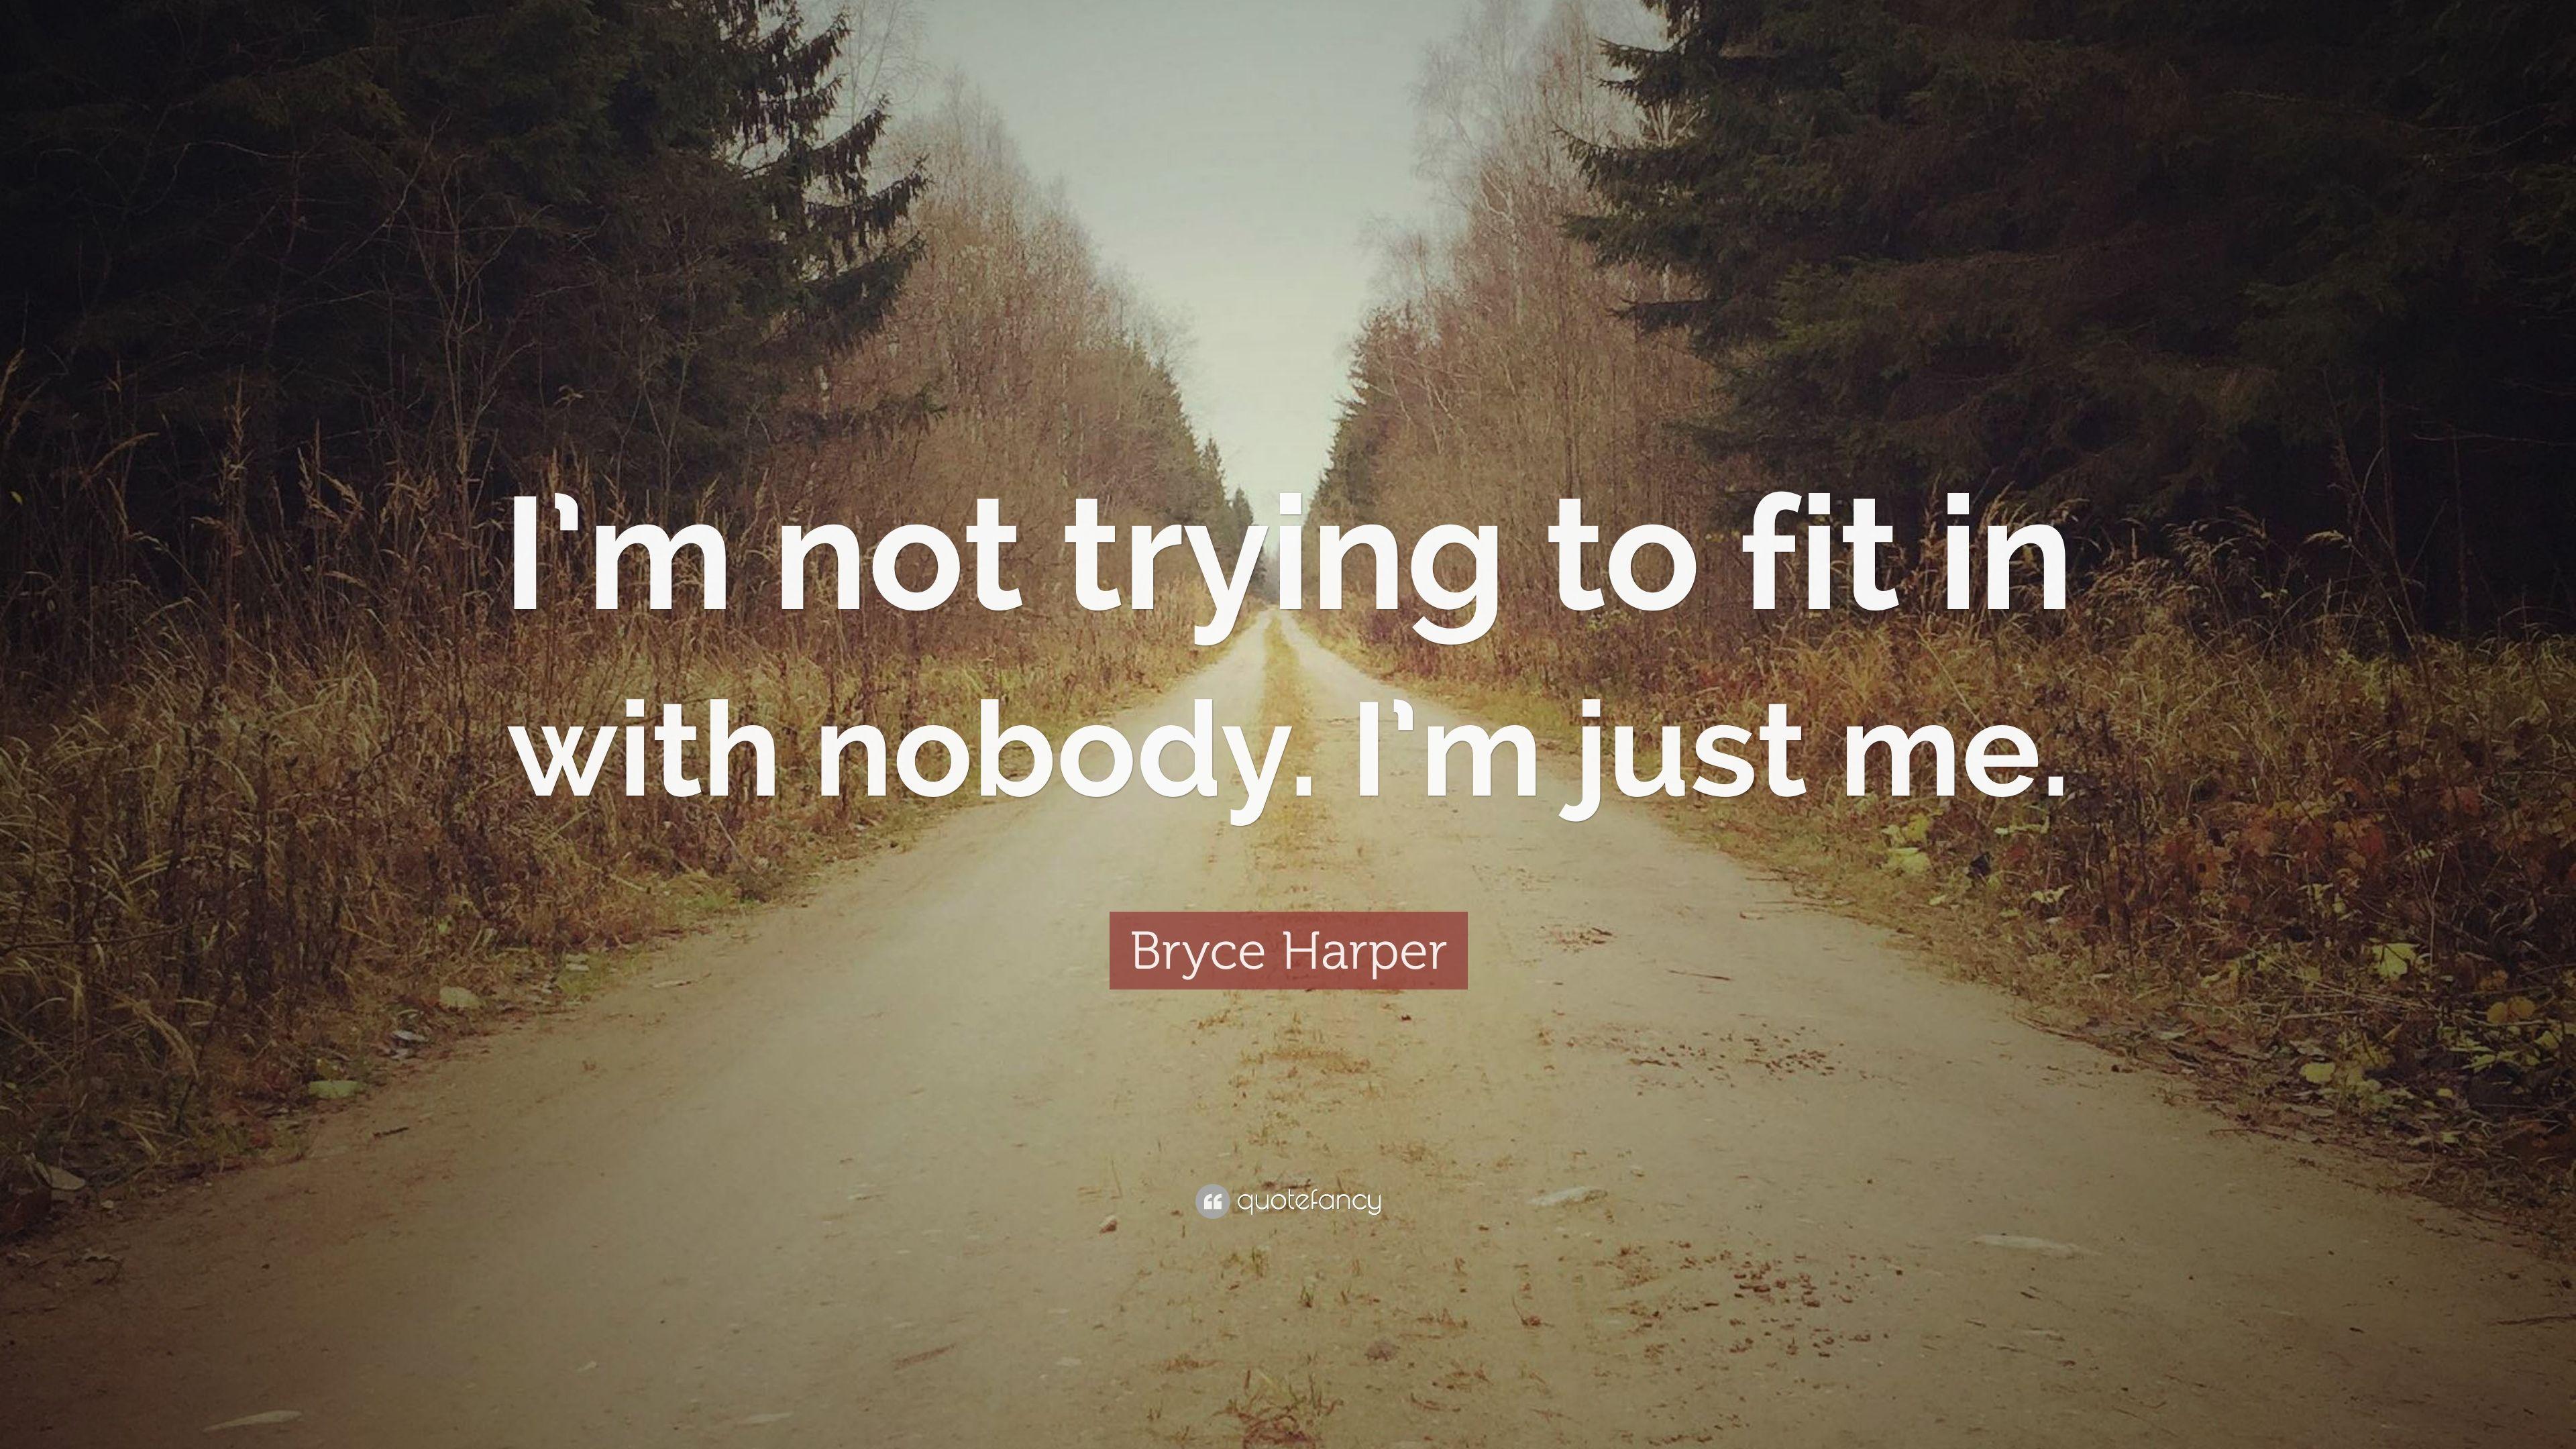 Bryce Harper Quote: “I'm not trying to fit in with nobody. I'm